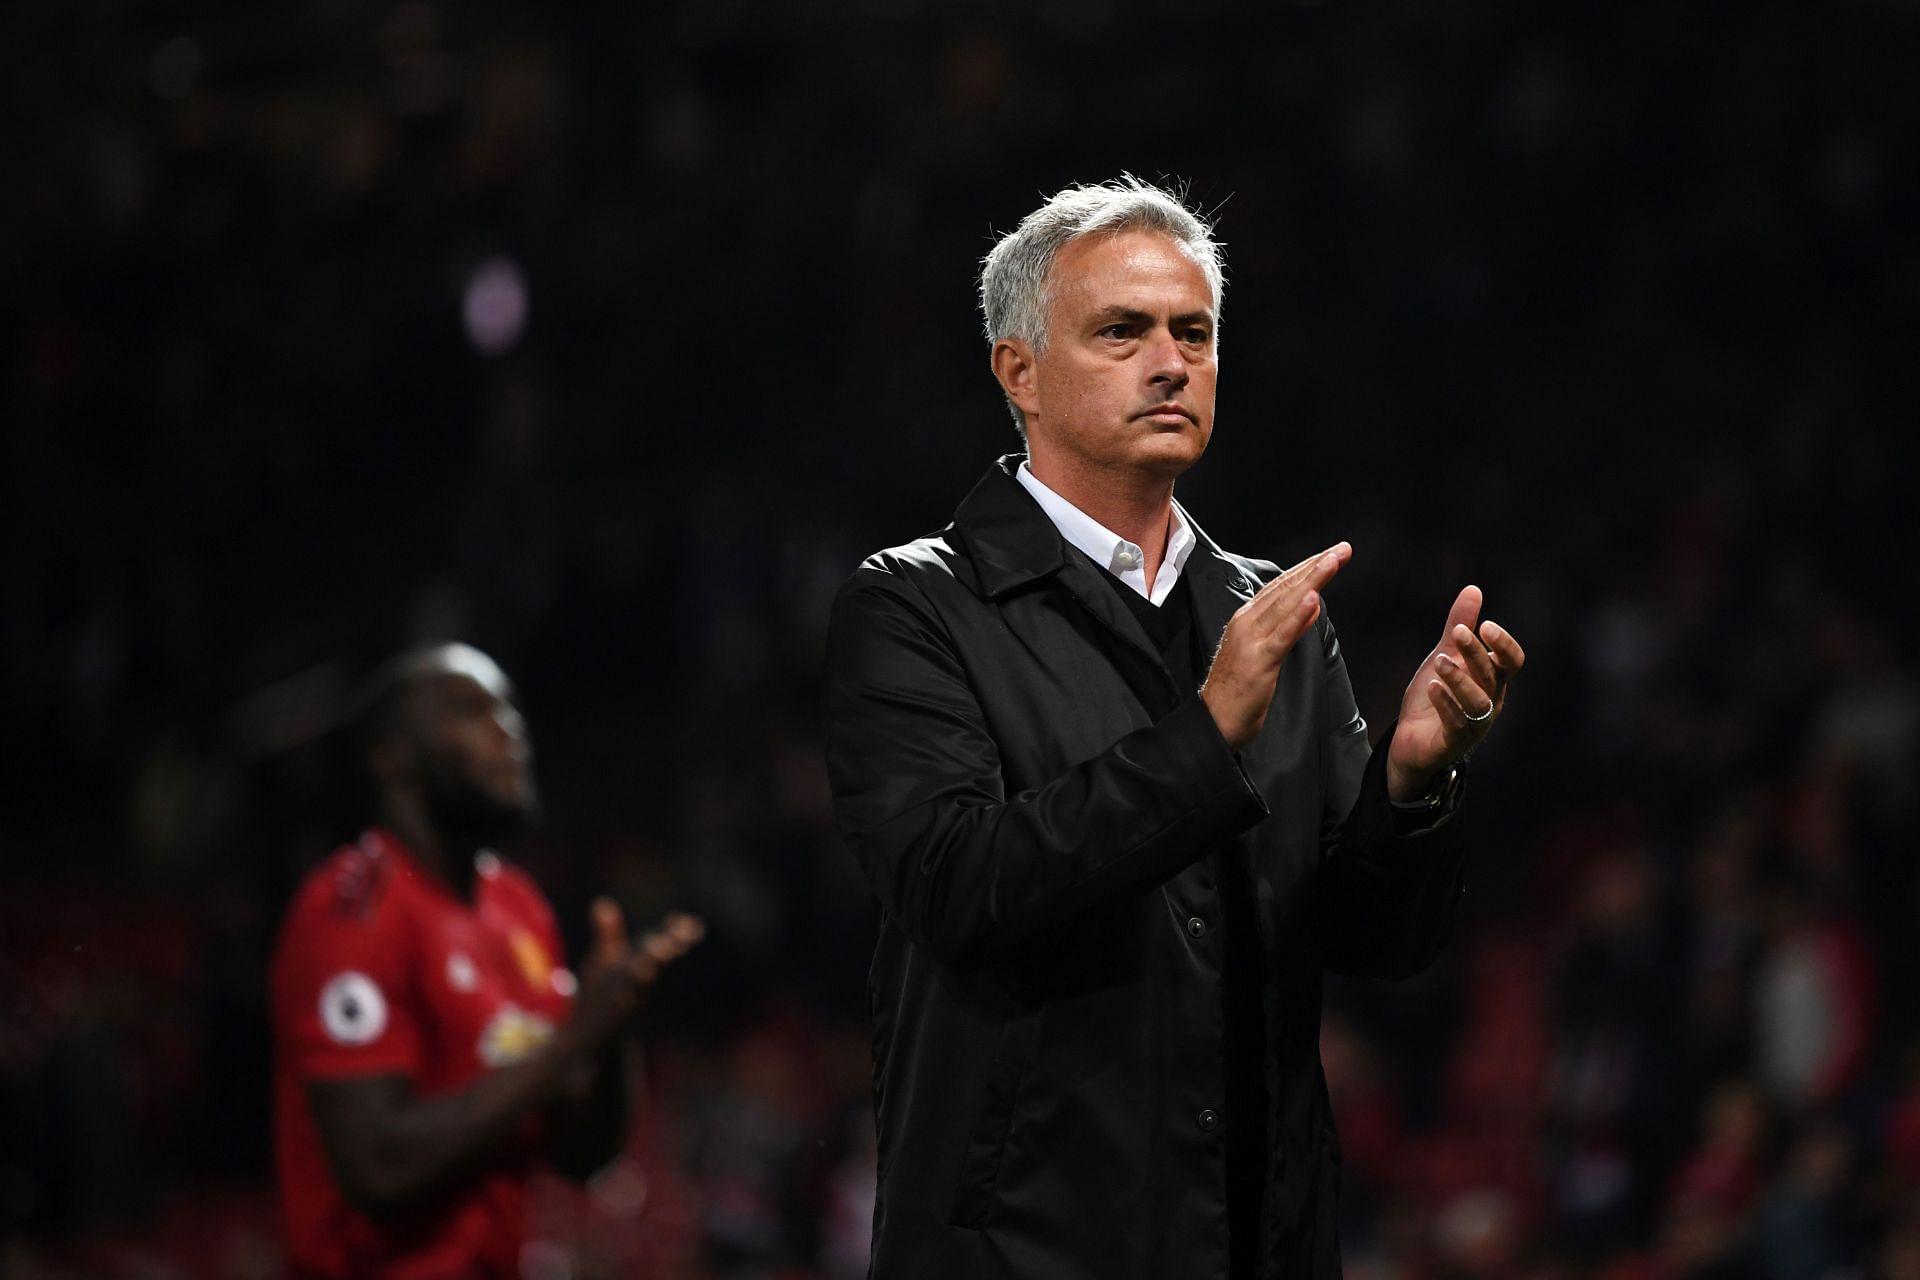 Jose Mourinho was expected to achieve big things at Manchester United